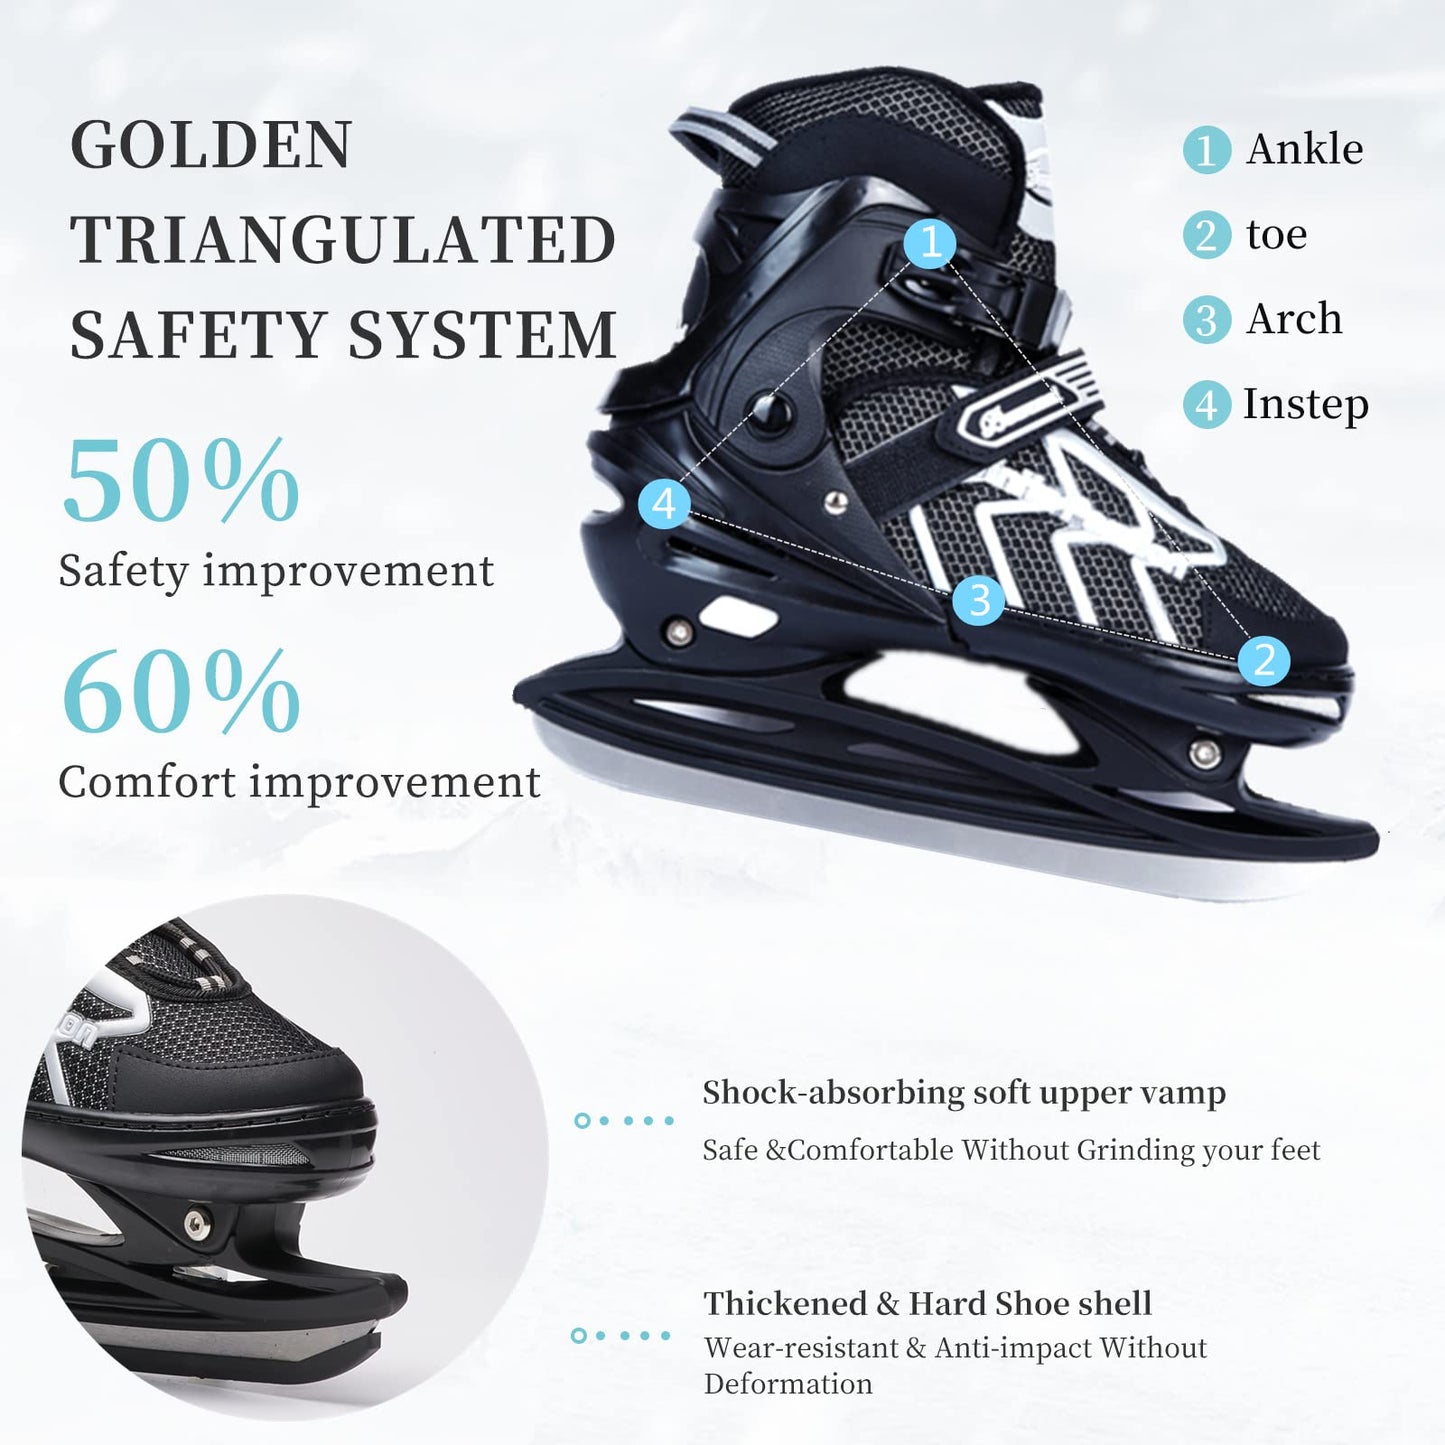 DUWIN Ice Skates，Hockey Skates,Skates with Adjustable 4 Sizes for Boys Girls Youth Men Women and Beginners